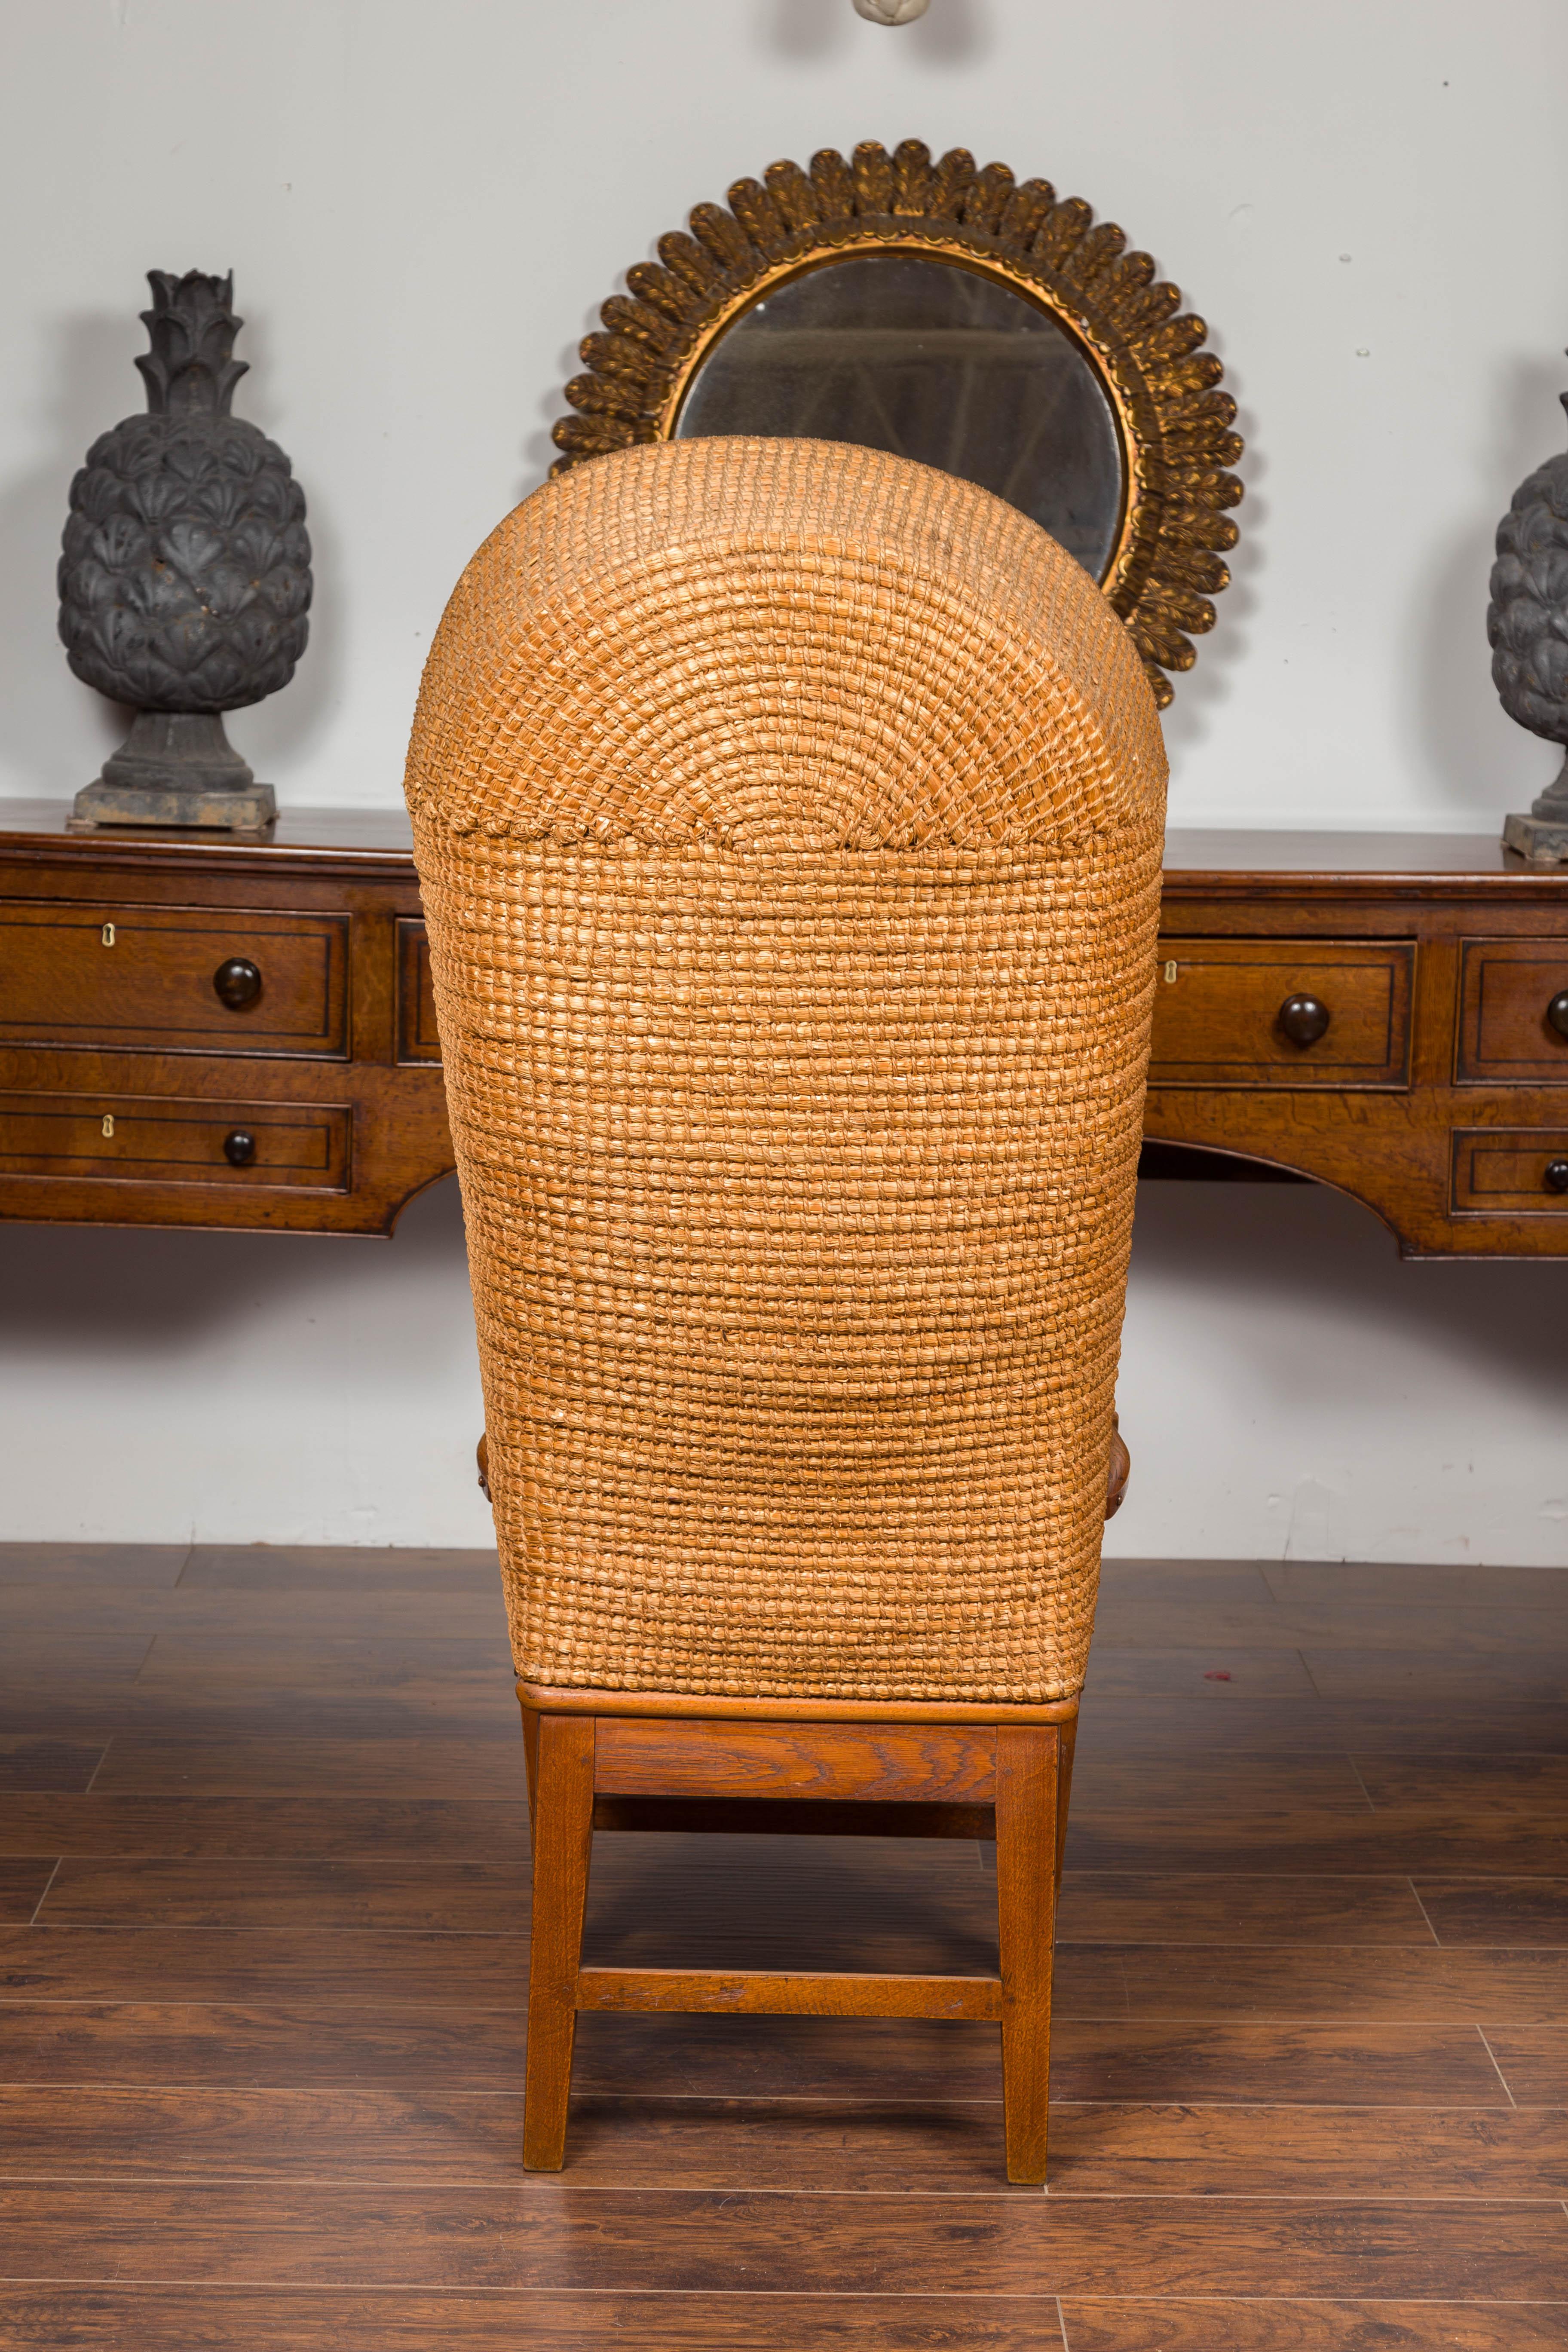 Scottish 1900s Orkney Island Canopy Chair with Hooded Handwoven Straw Back For Sale 1